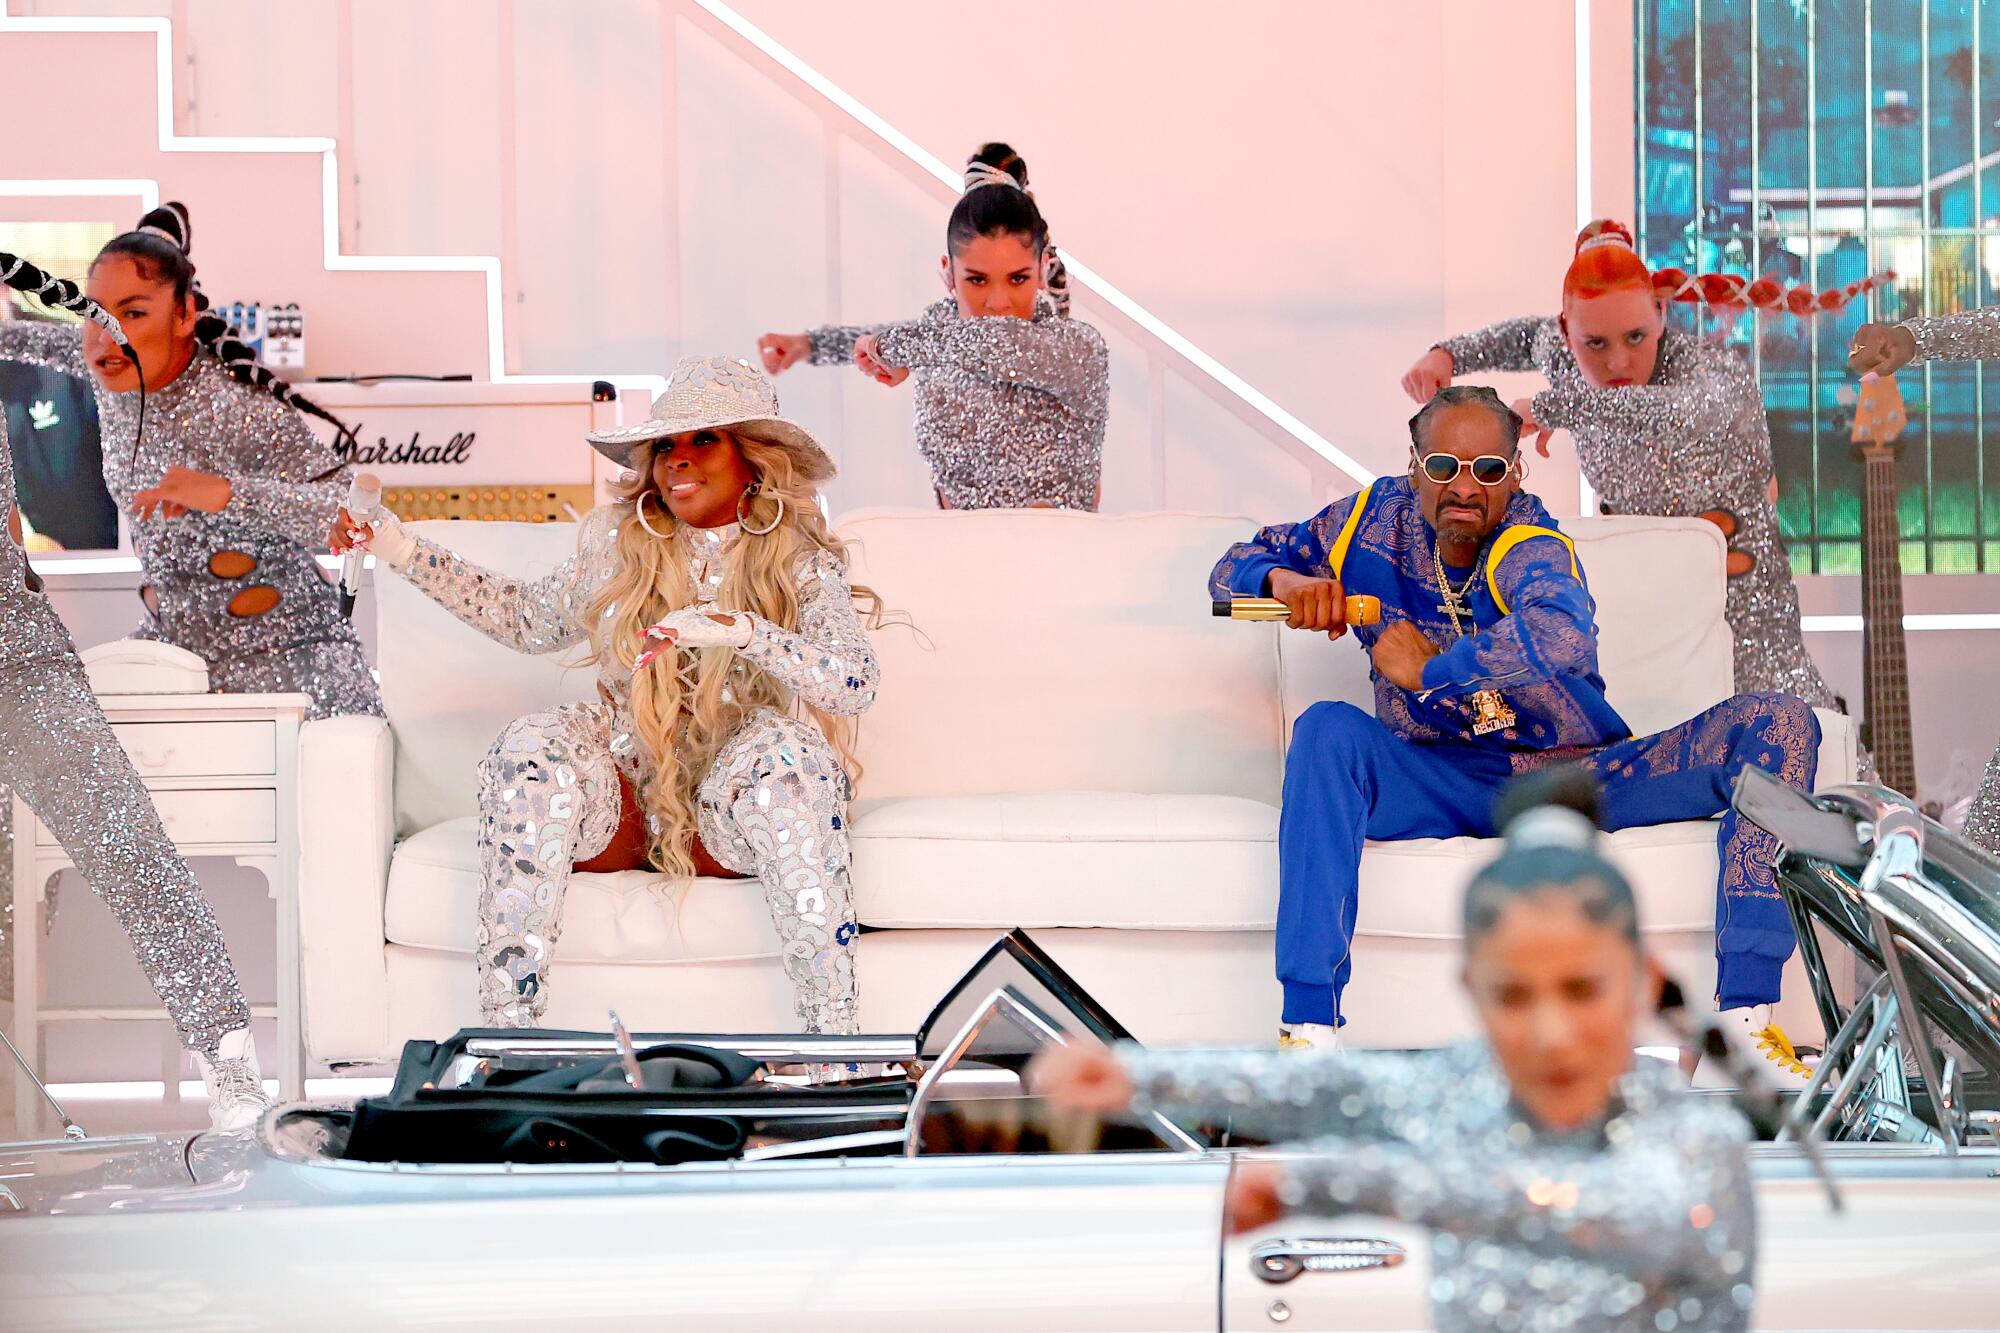 Mary J. Blige and Snoop Dogg on a white stage surrounded by backup dancers.